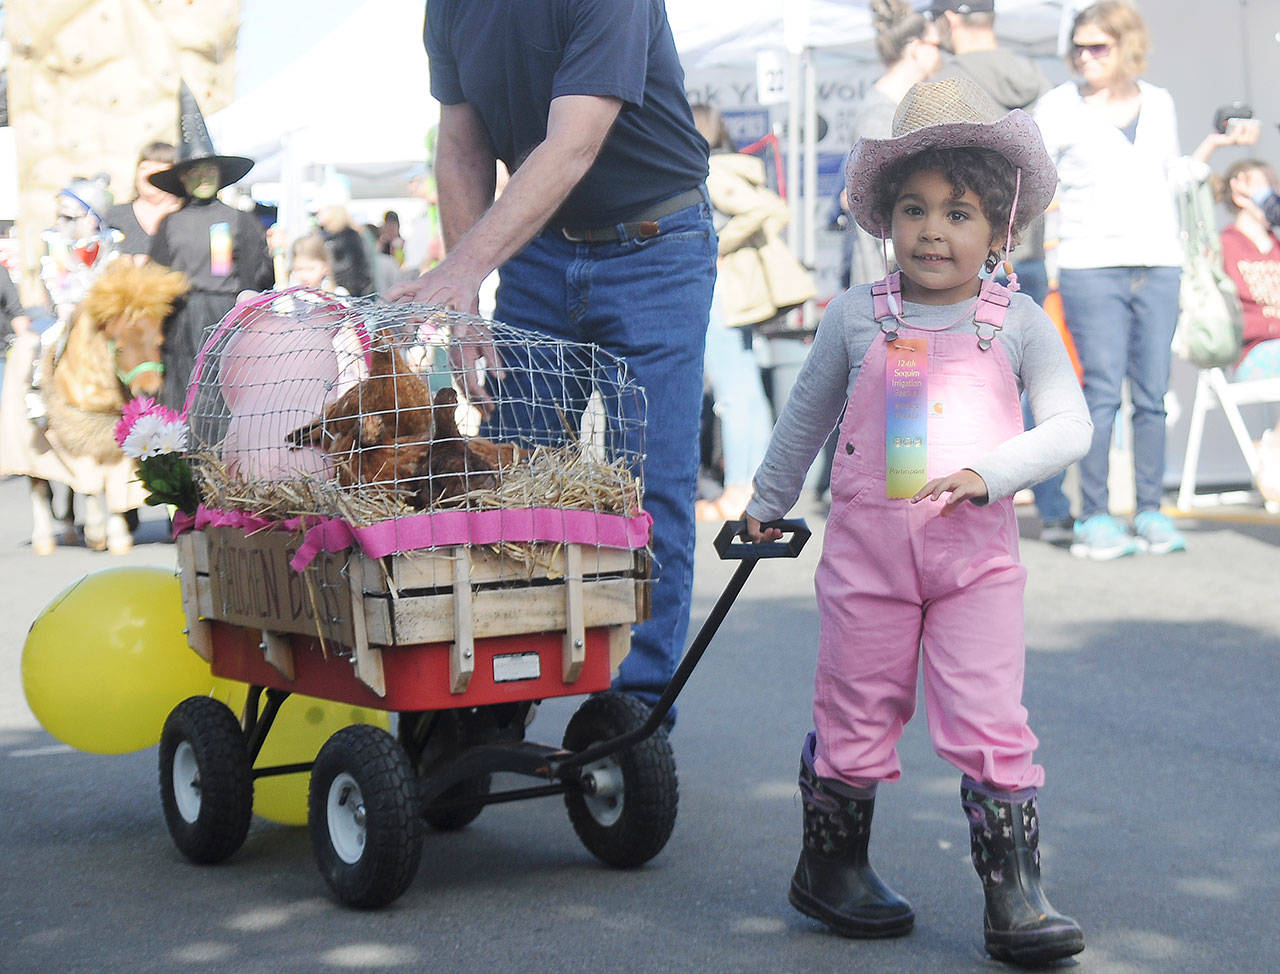 Indira Reichner, 3, of Sequim, pulls a wagon carrying chickens in the Kids Parade on May 4. The youngster took first place in the parade’s pets category. Sequim Gazette photo by Michael Dashiell